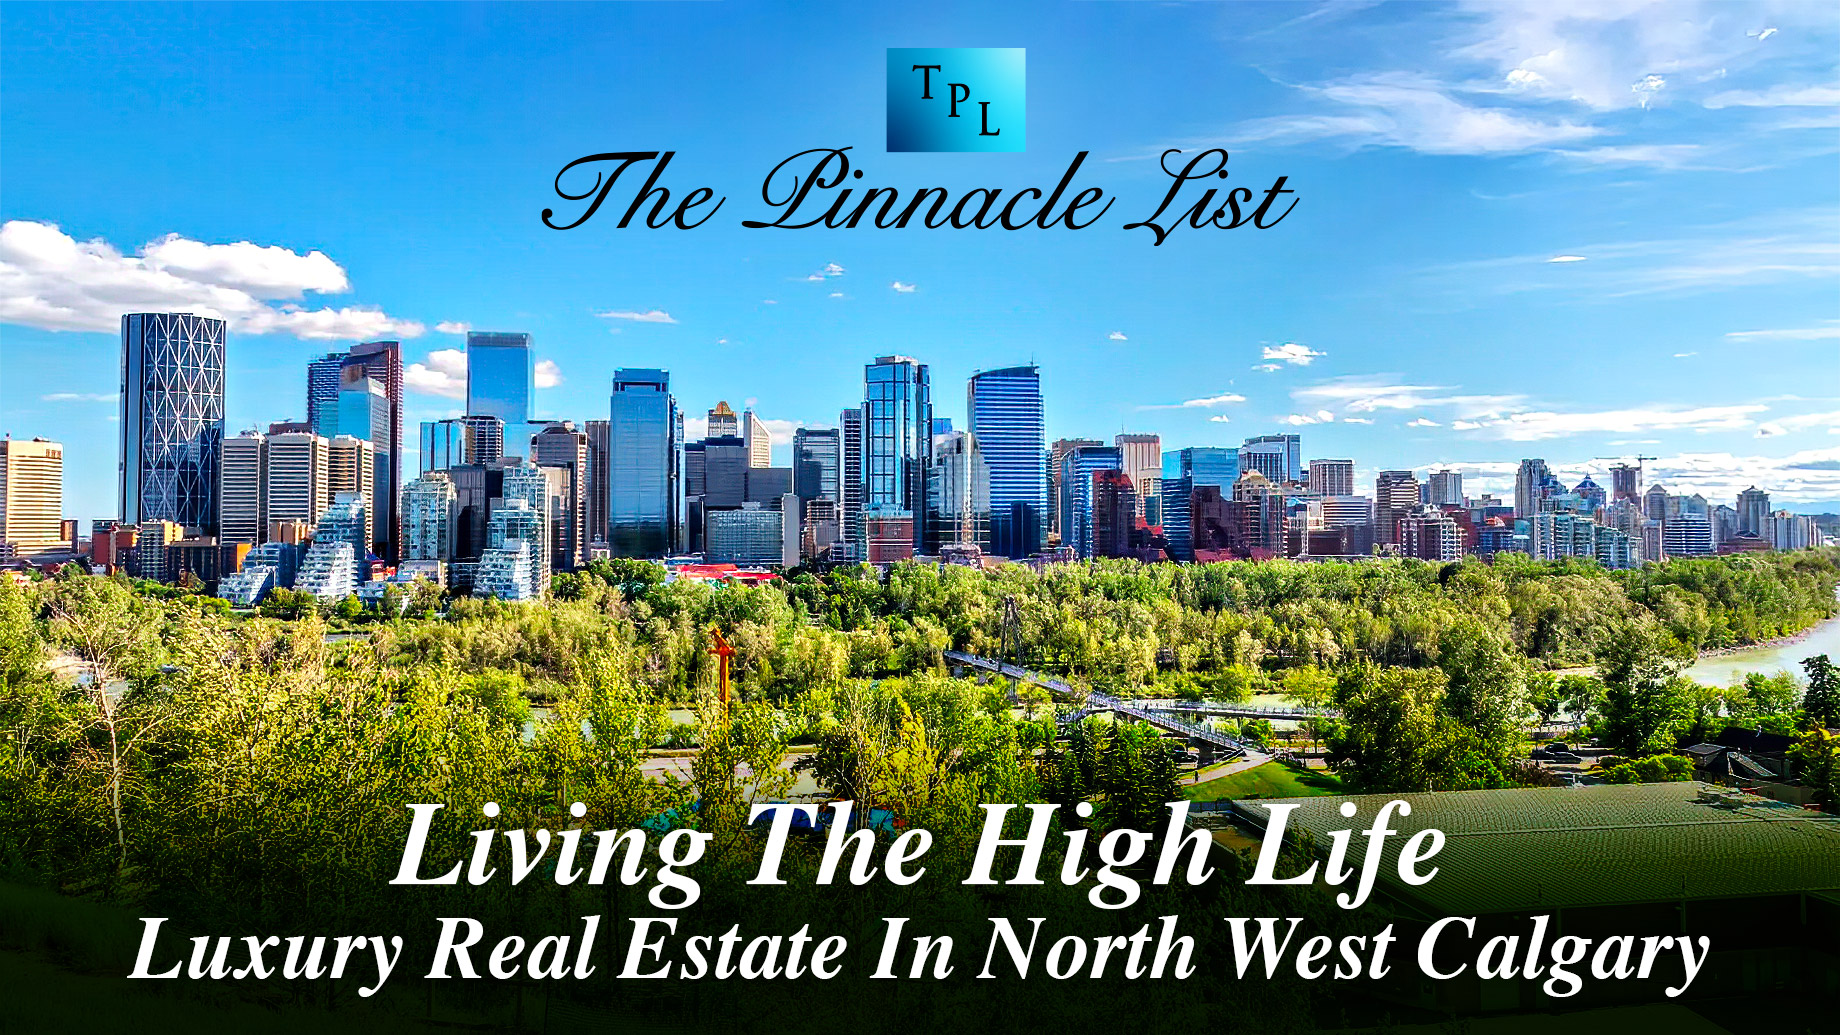 Living The High Life: Luxury Real Estate In North West Calgary